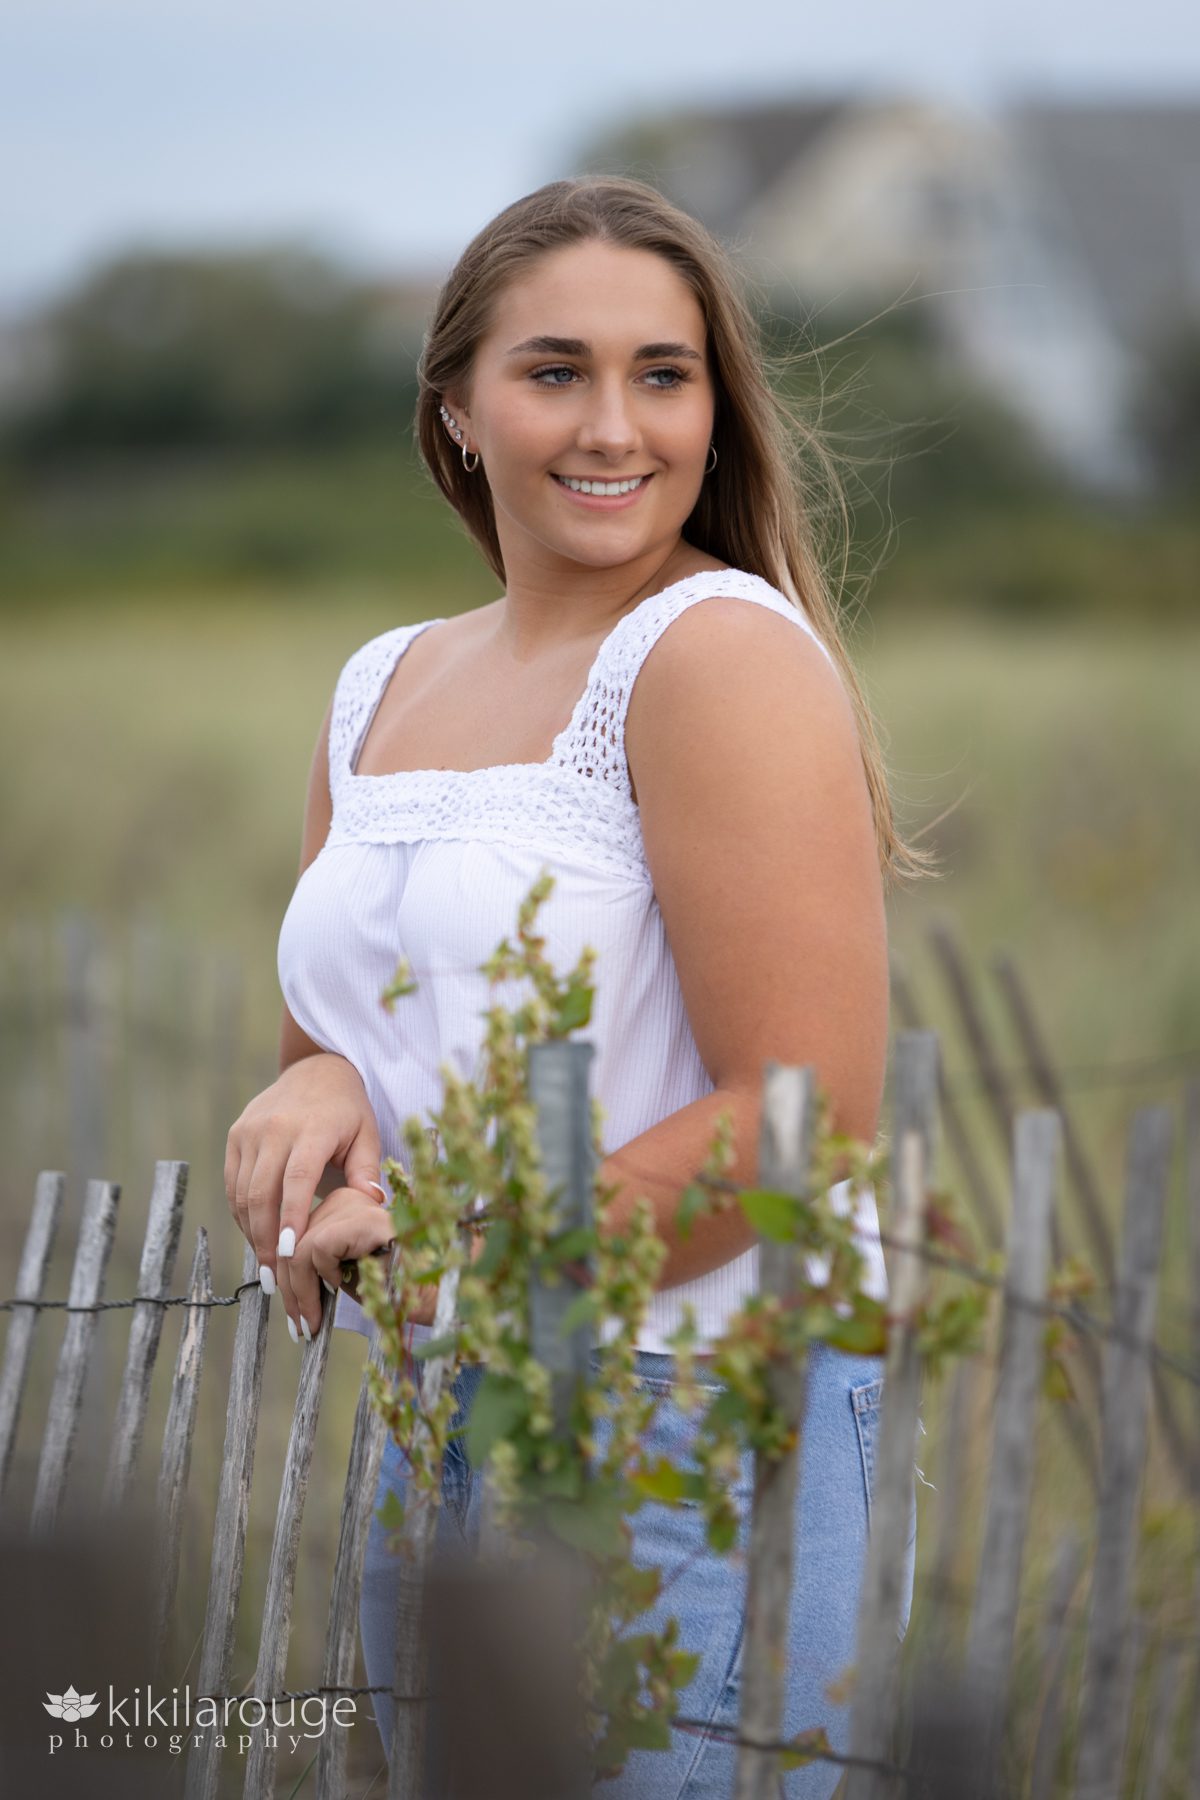 Triton Senior Portrait Girl in Jeans with white top tied in back at Plum Island dunes